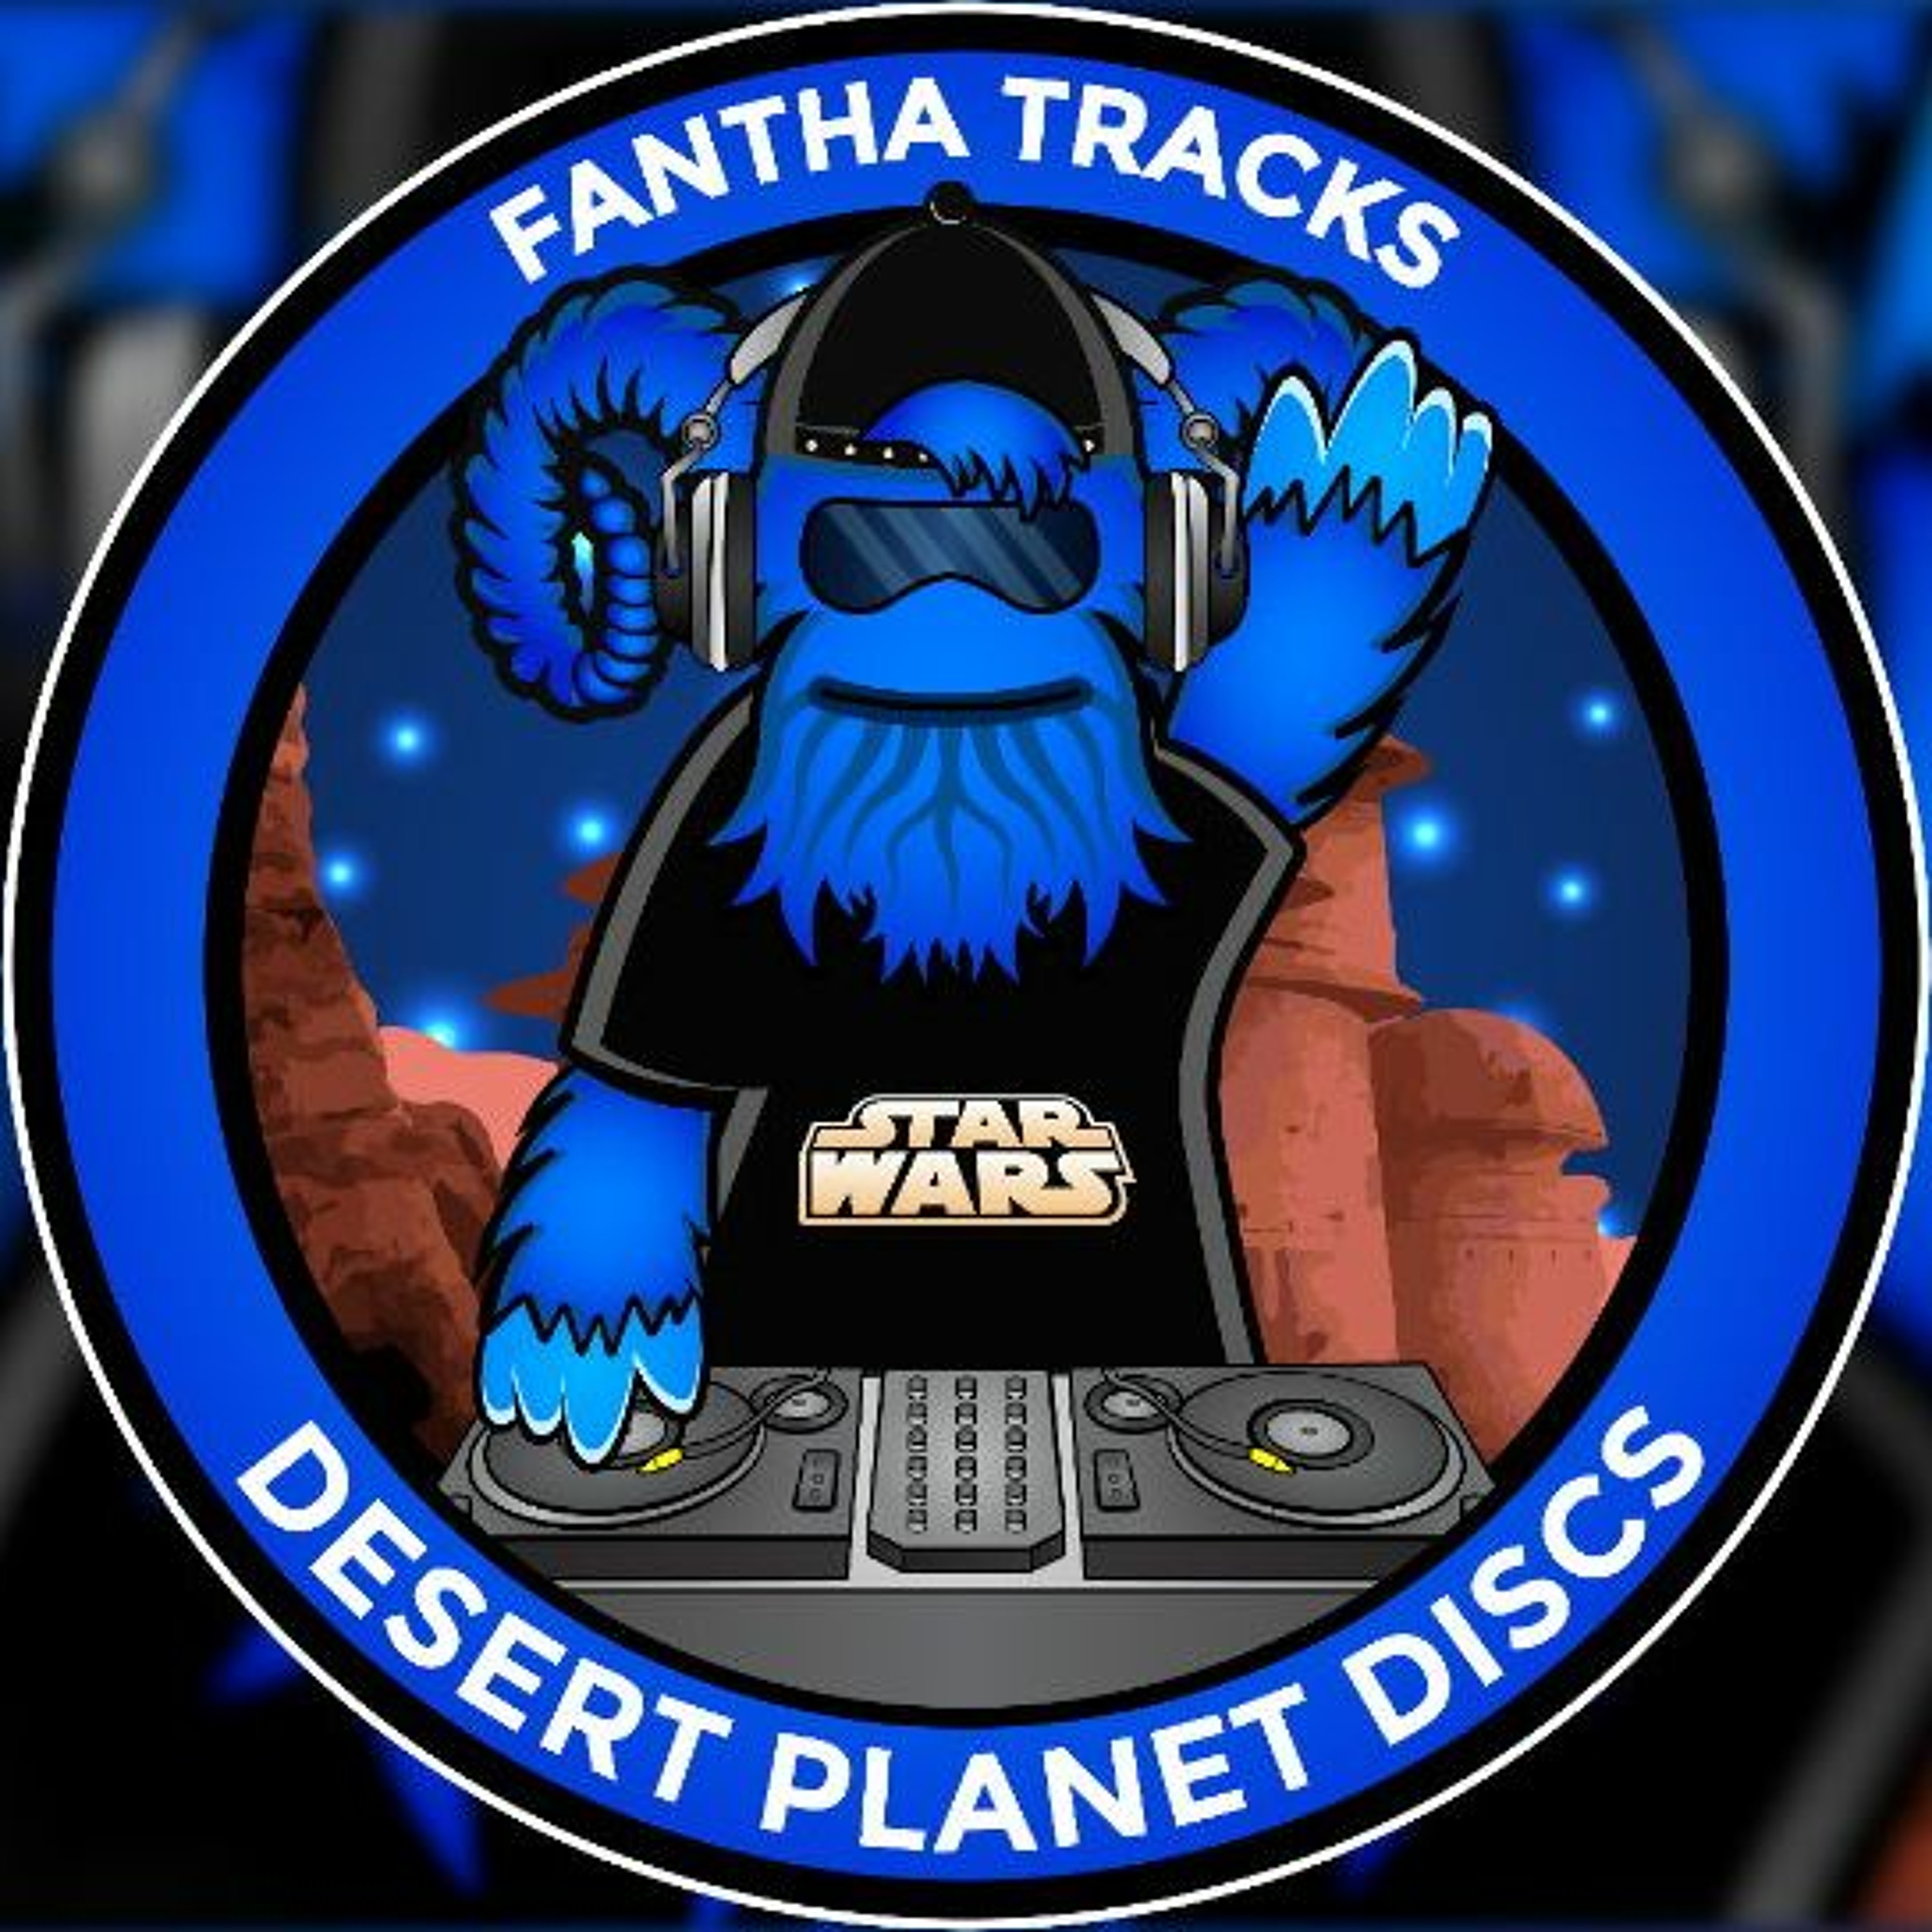 Desert Planet Discs Track 29: Tales from the #CANTINA (and more)